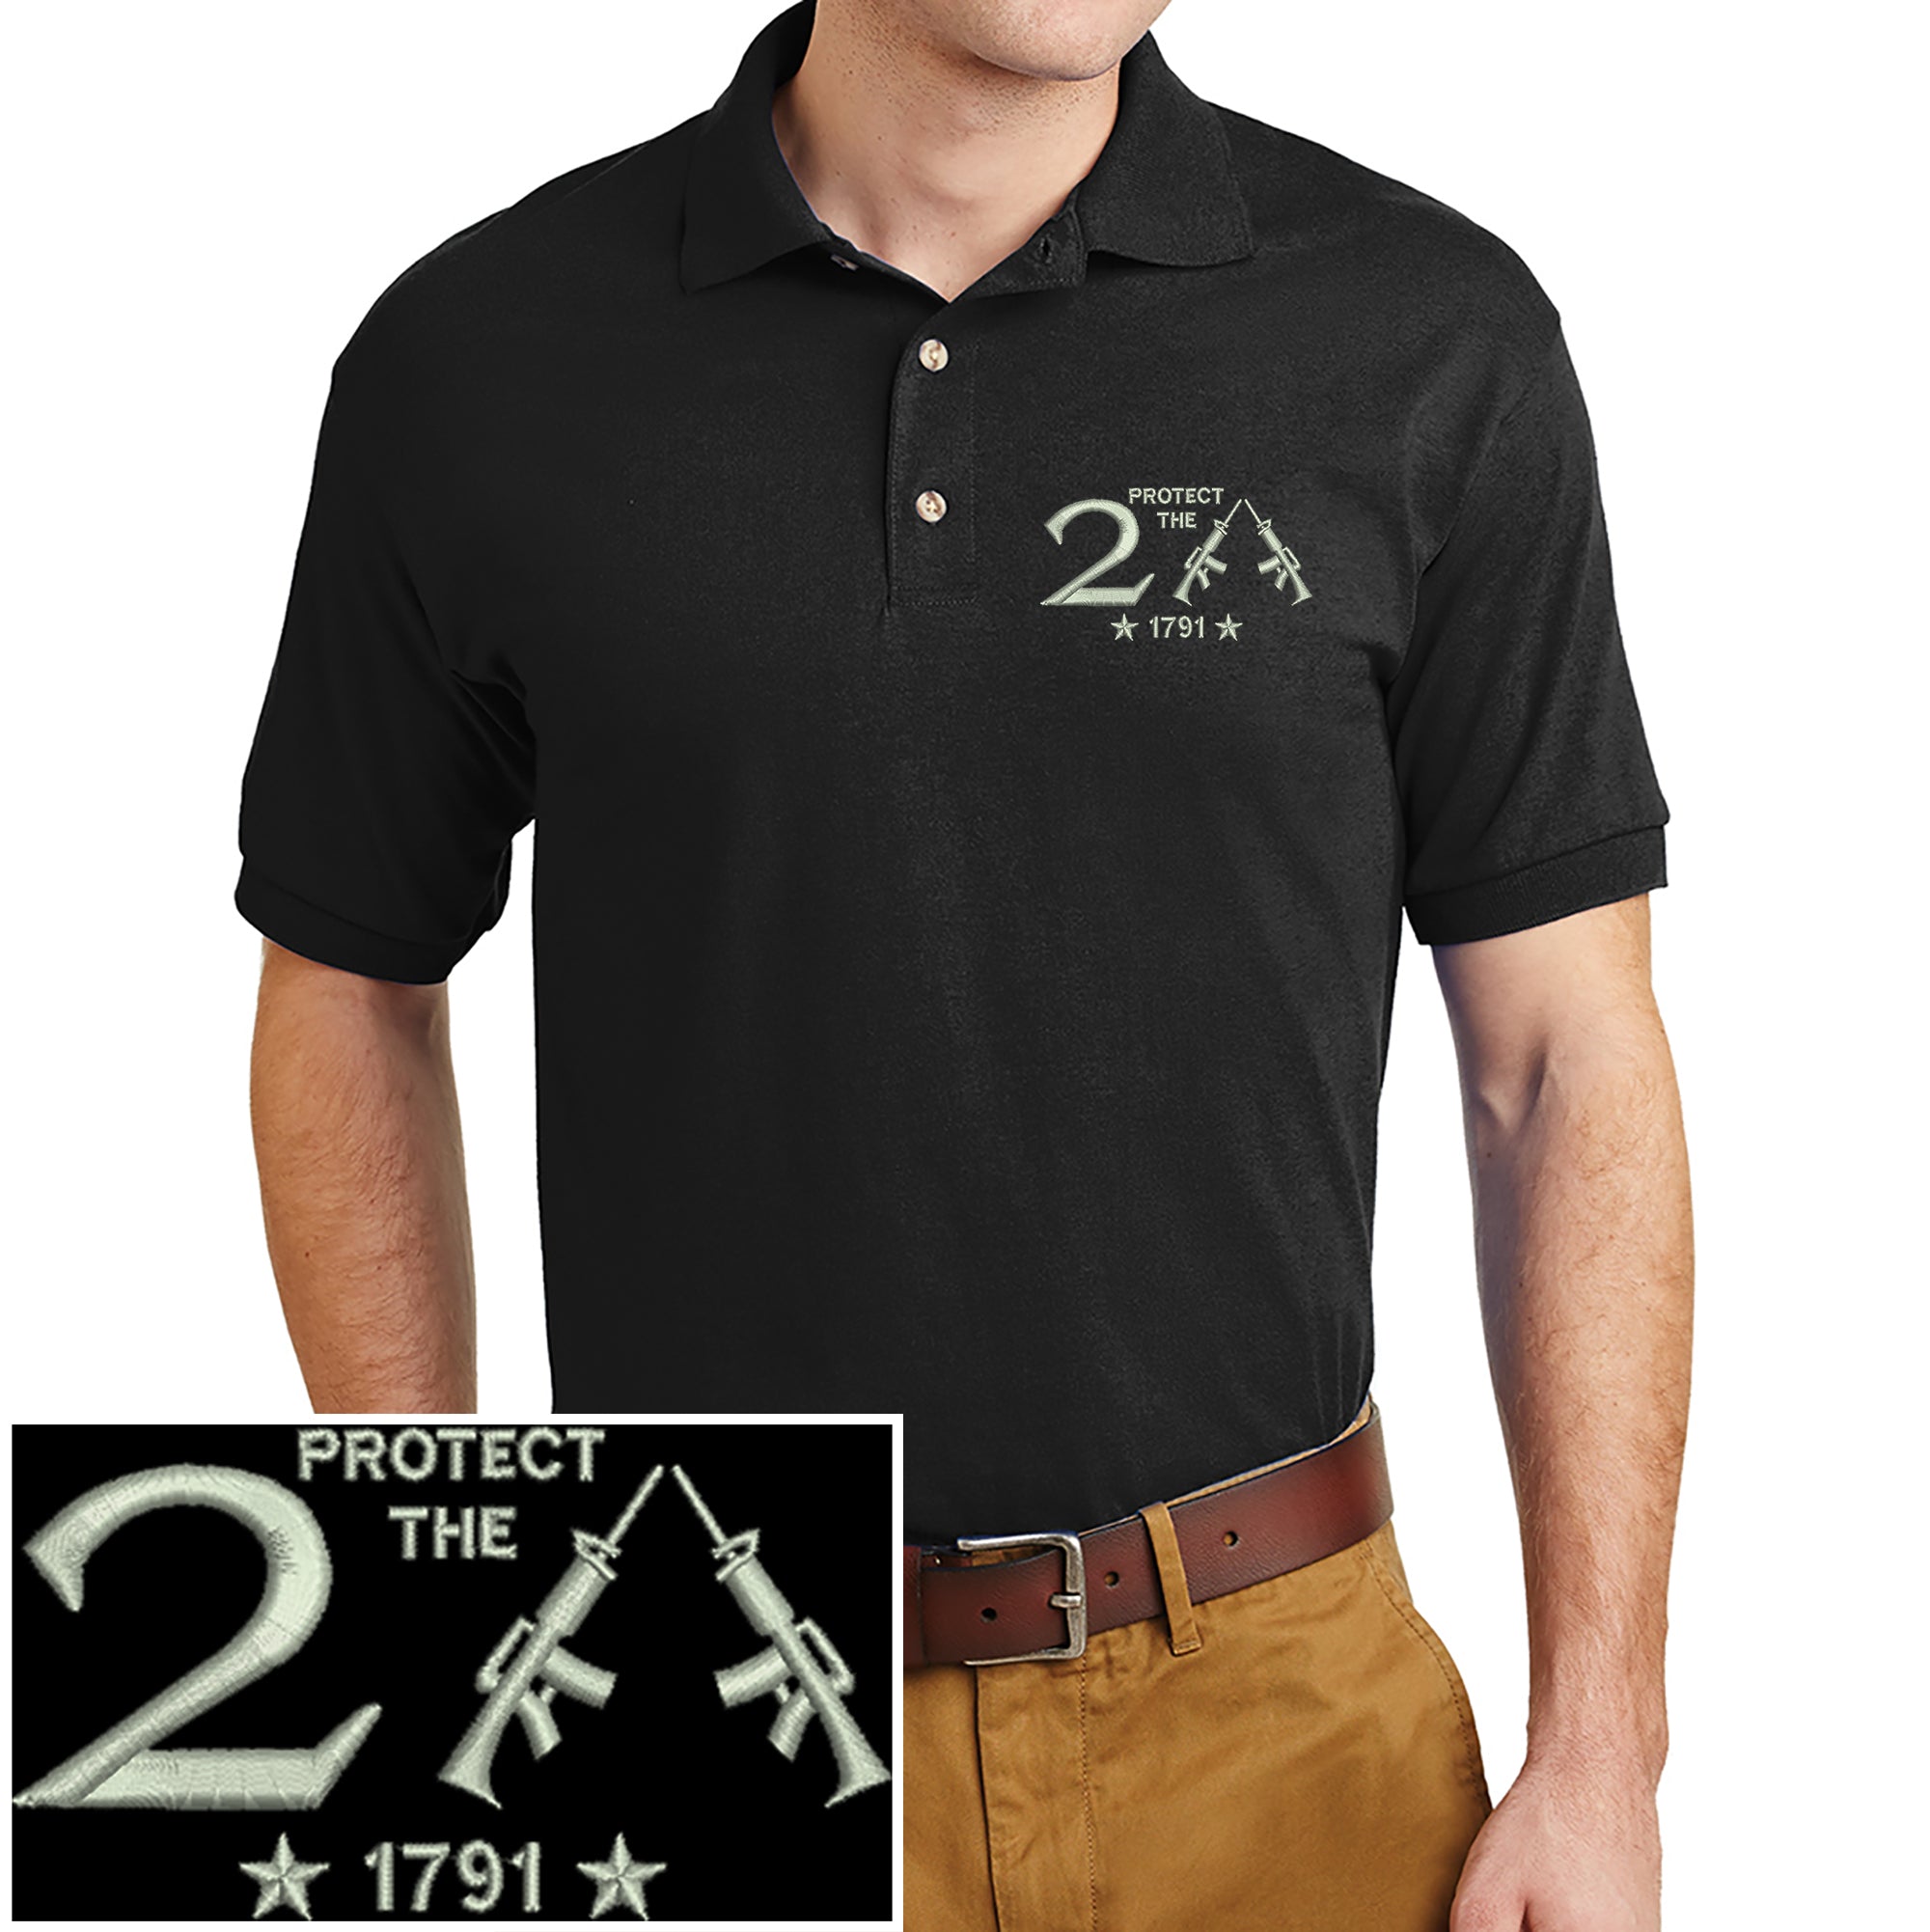 Protect The 2nd Amendment 1791 AR15 Guns Right Freedom Embroidered Men's Short Sleeve Polo Shirt Patriotic Gift New